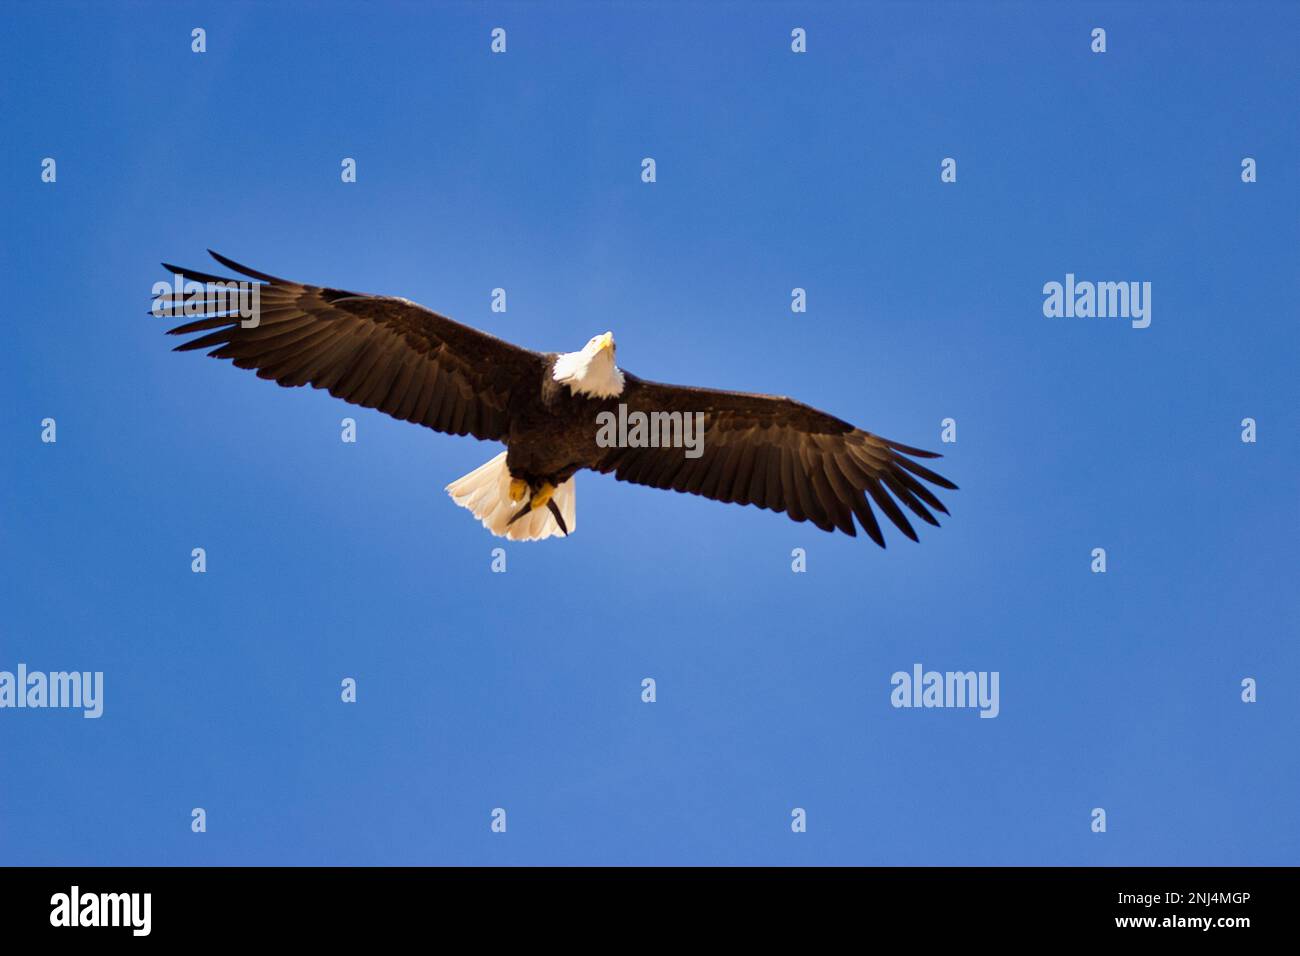 Full body shot of a white-tailed eagle in flight, blue sky in the background. Stock Photo